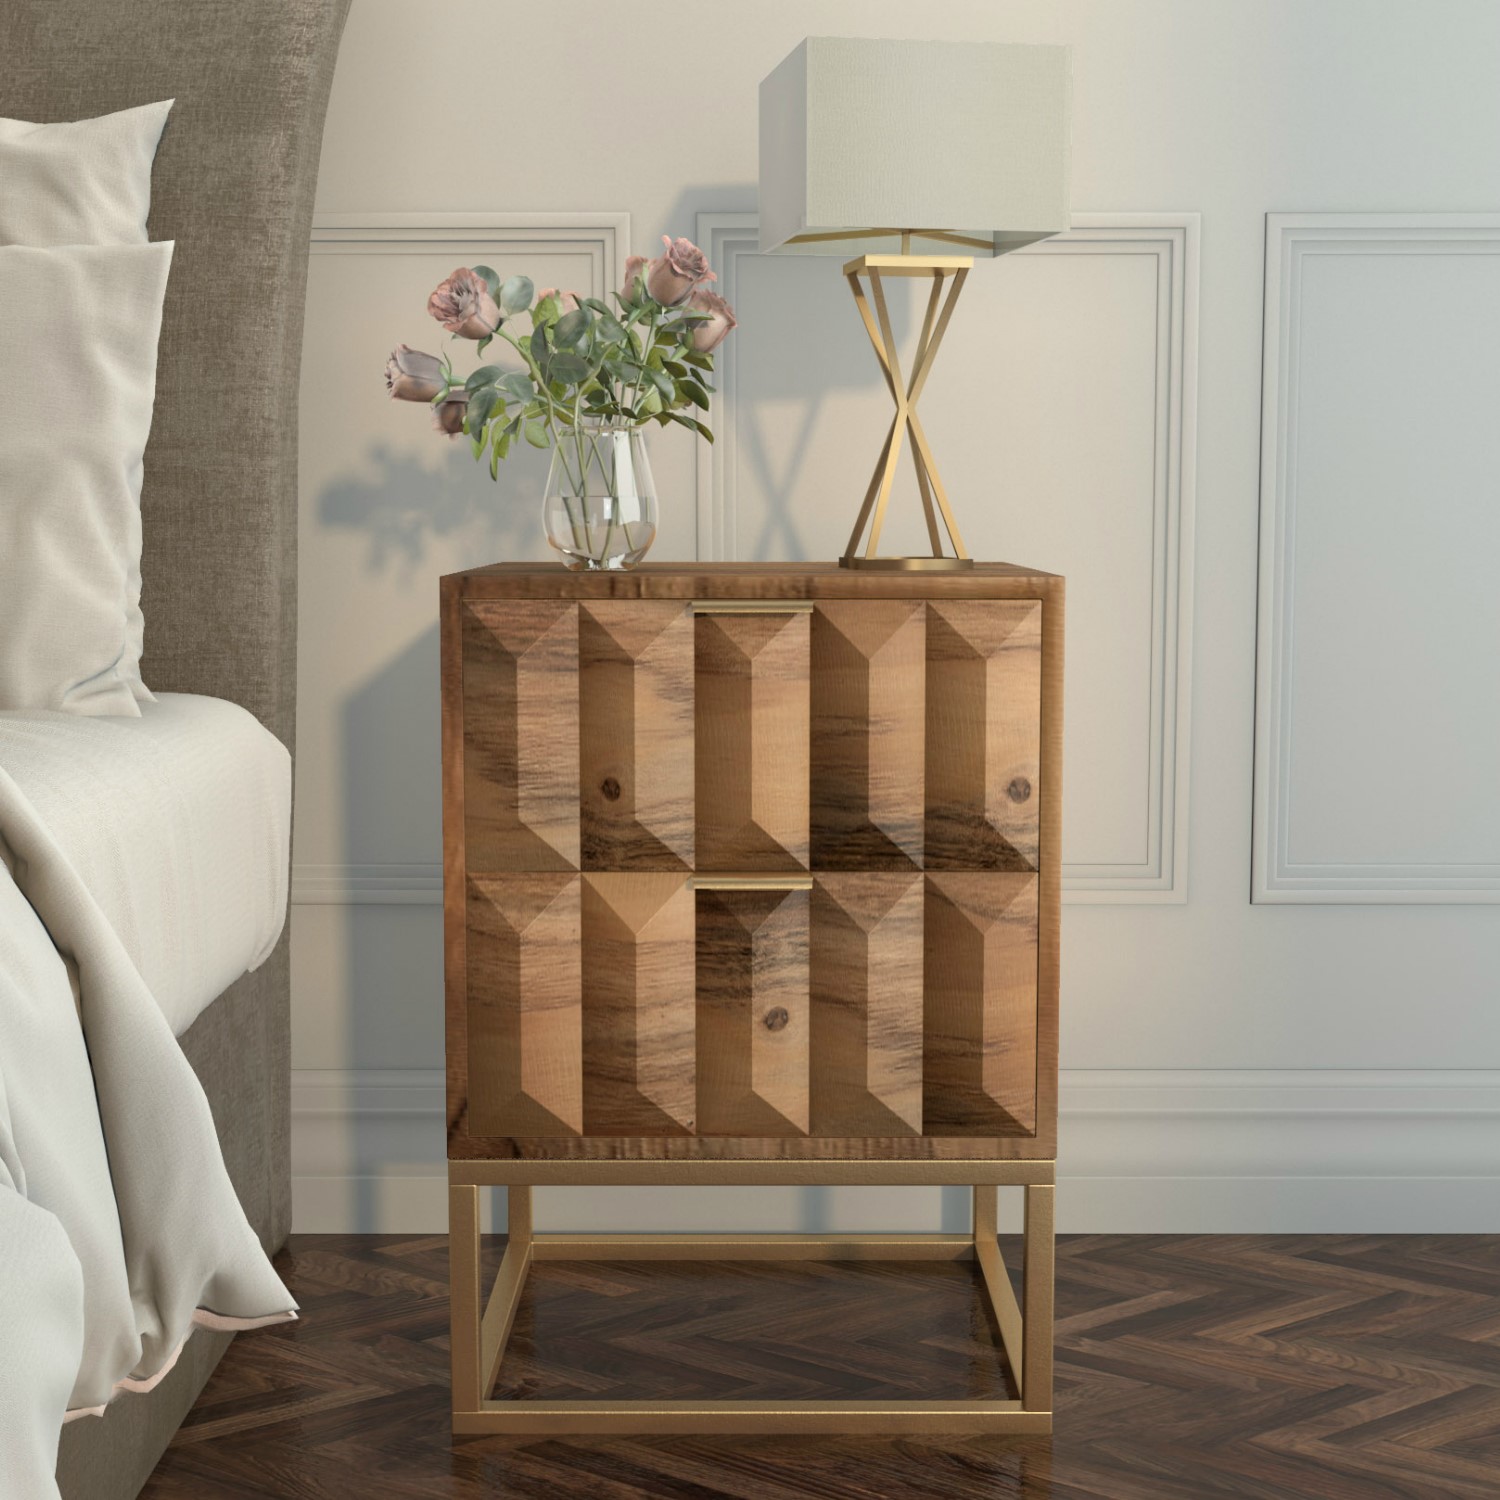 Featured image of post Wood Bedside Tables Uk - With classy options like mirrored, oak and painted, our range has.